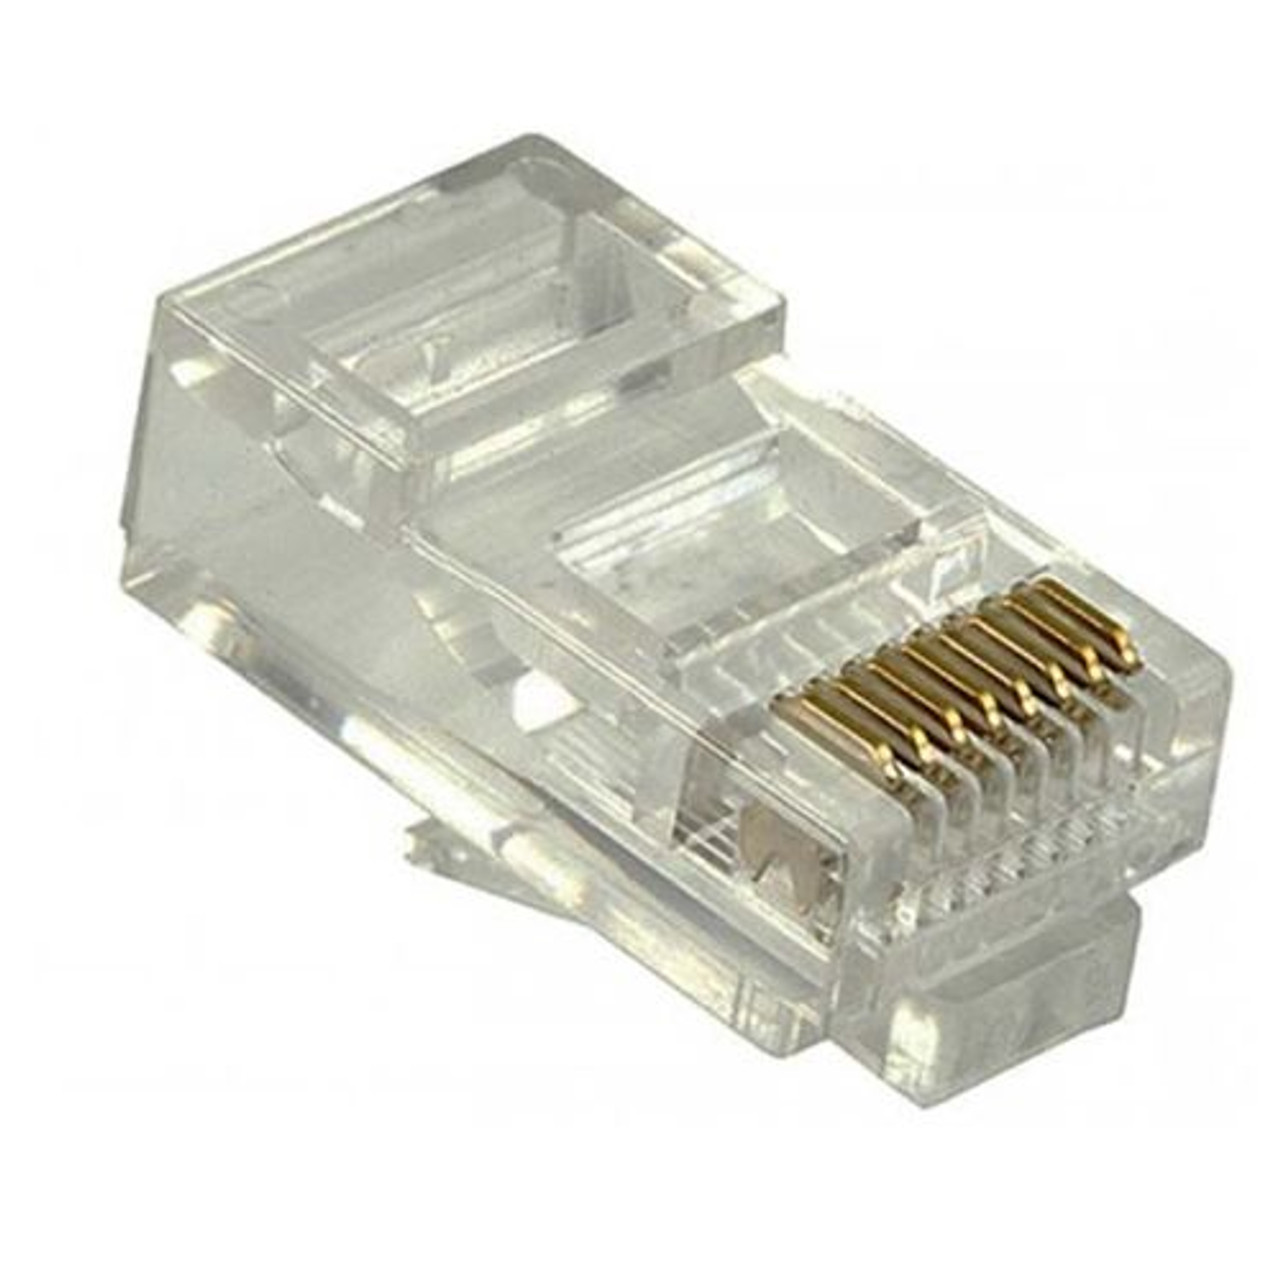 Eagle CAT6 Plug Connector RJ45 10 Pack Modular 8P8C Solid Conductor Beryllium Copper Jack Contacts 50 Micron Gold Plating Over 89 Micron Nickle